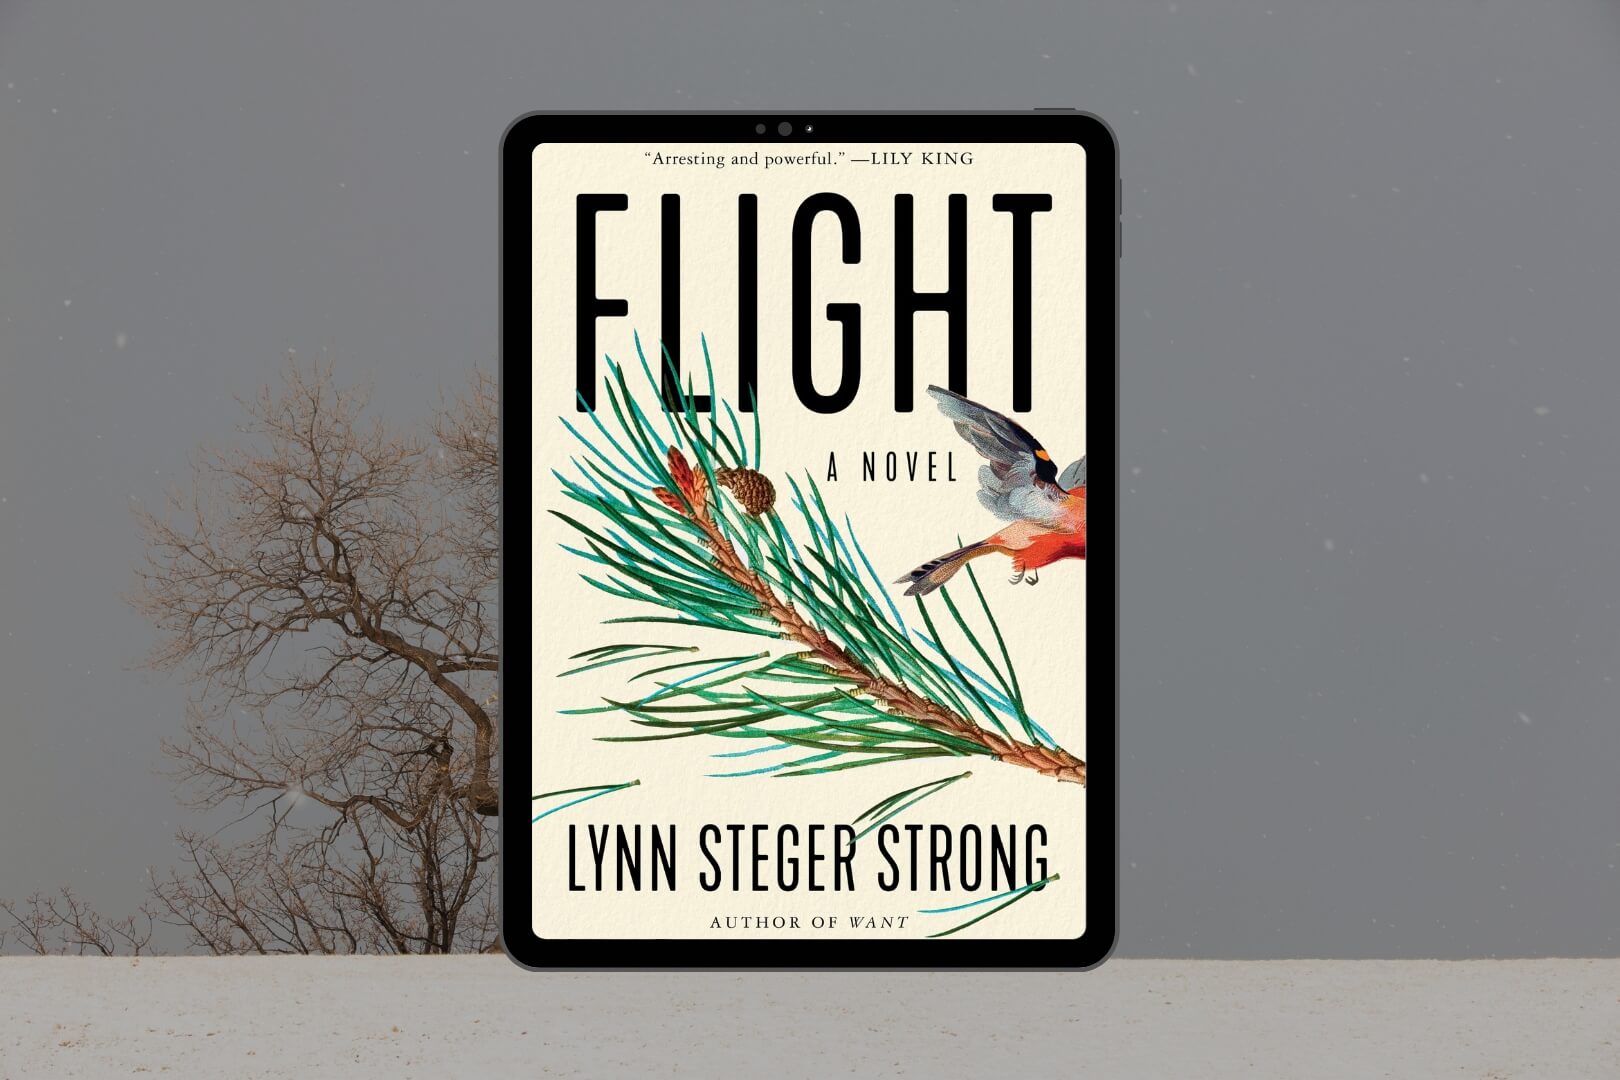 Book Club Questions for Flight by Lynn Steger Strong